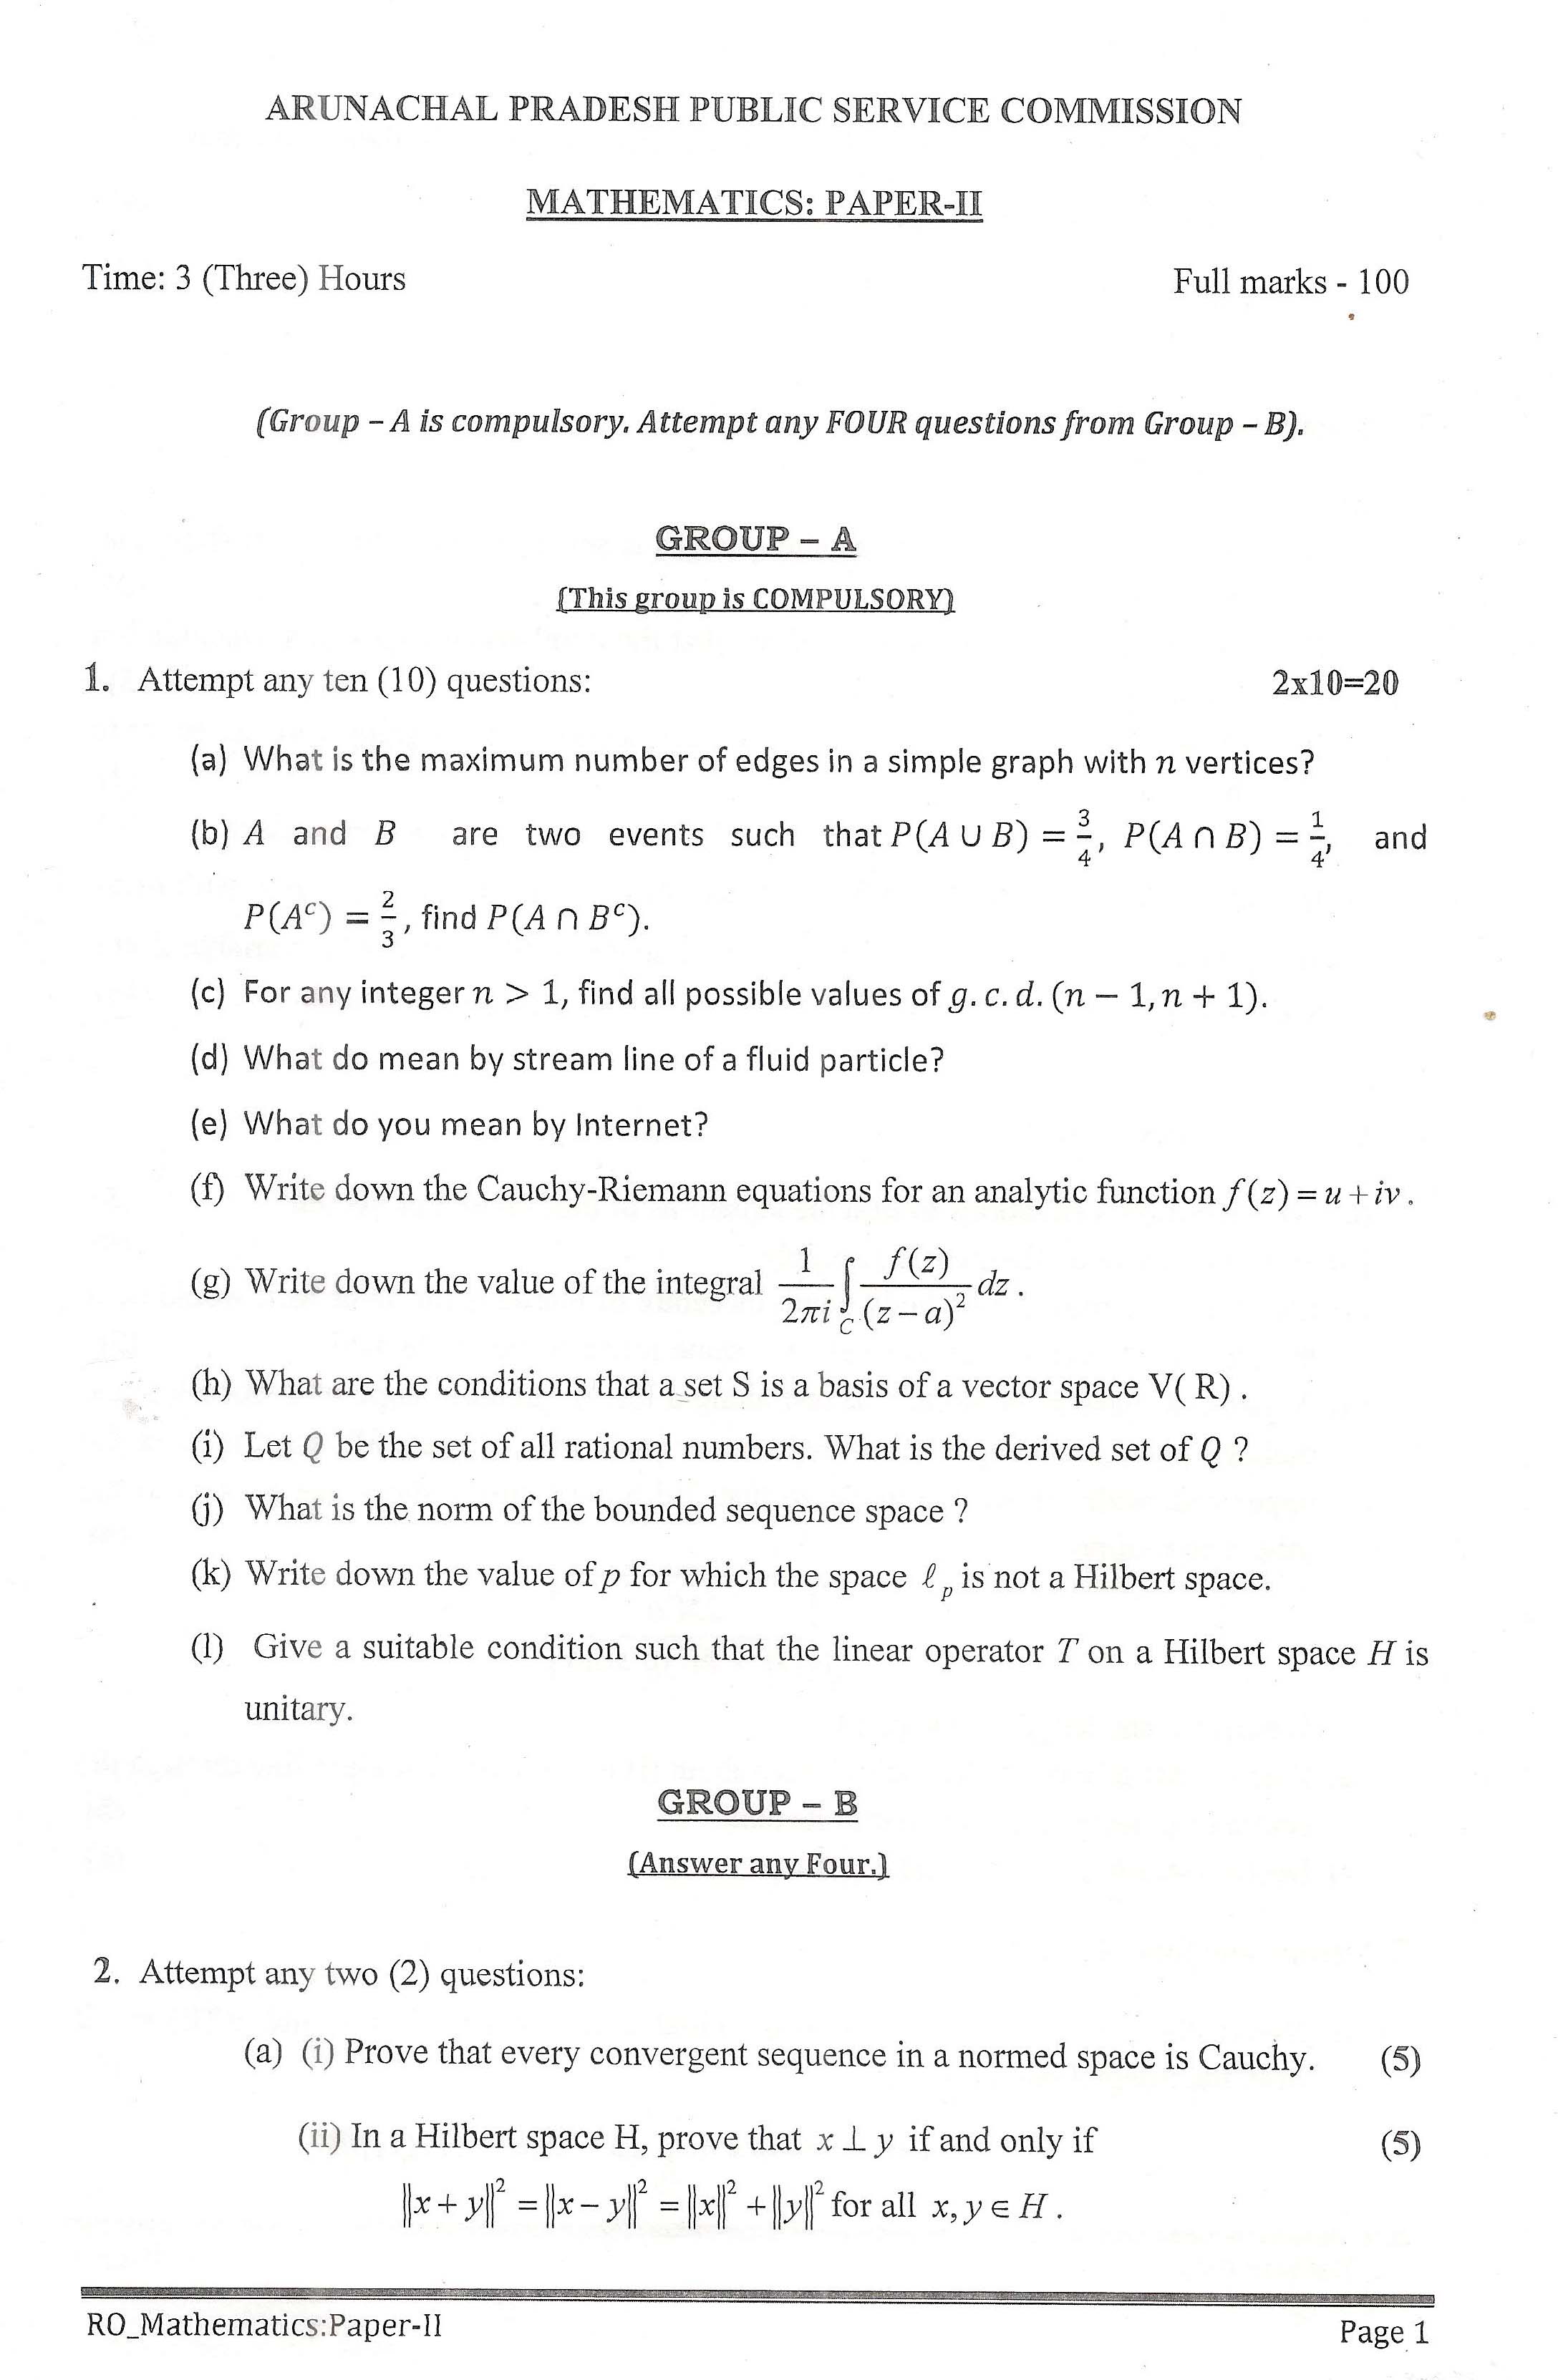 APPSC Research Officer Mathematics Paper II Exam Question Paper 2014 1